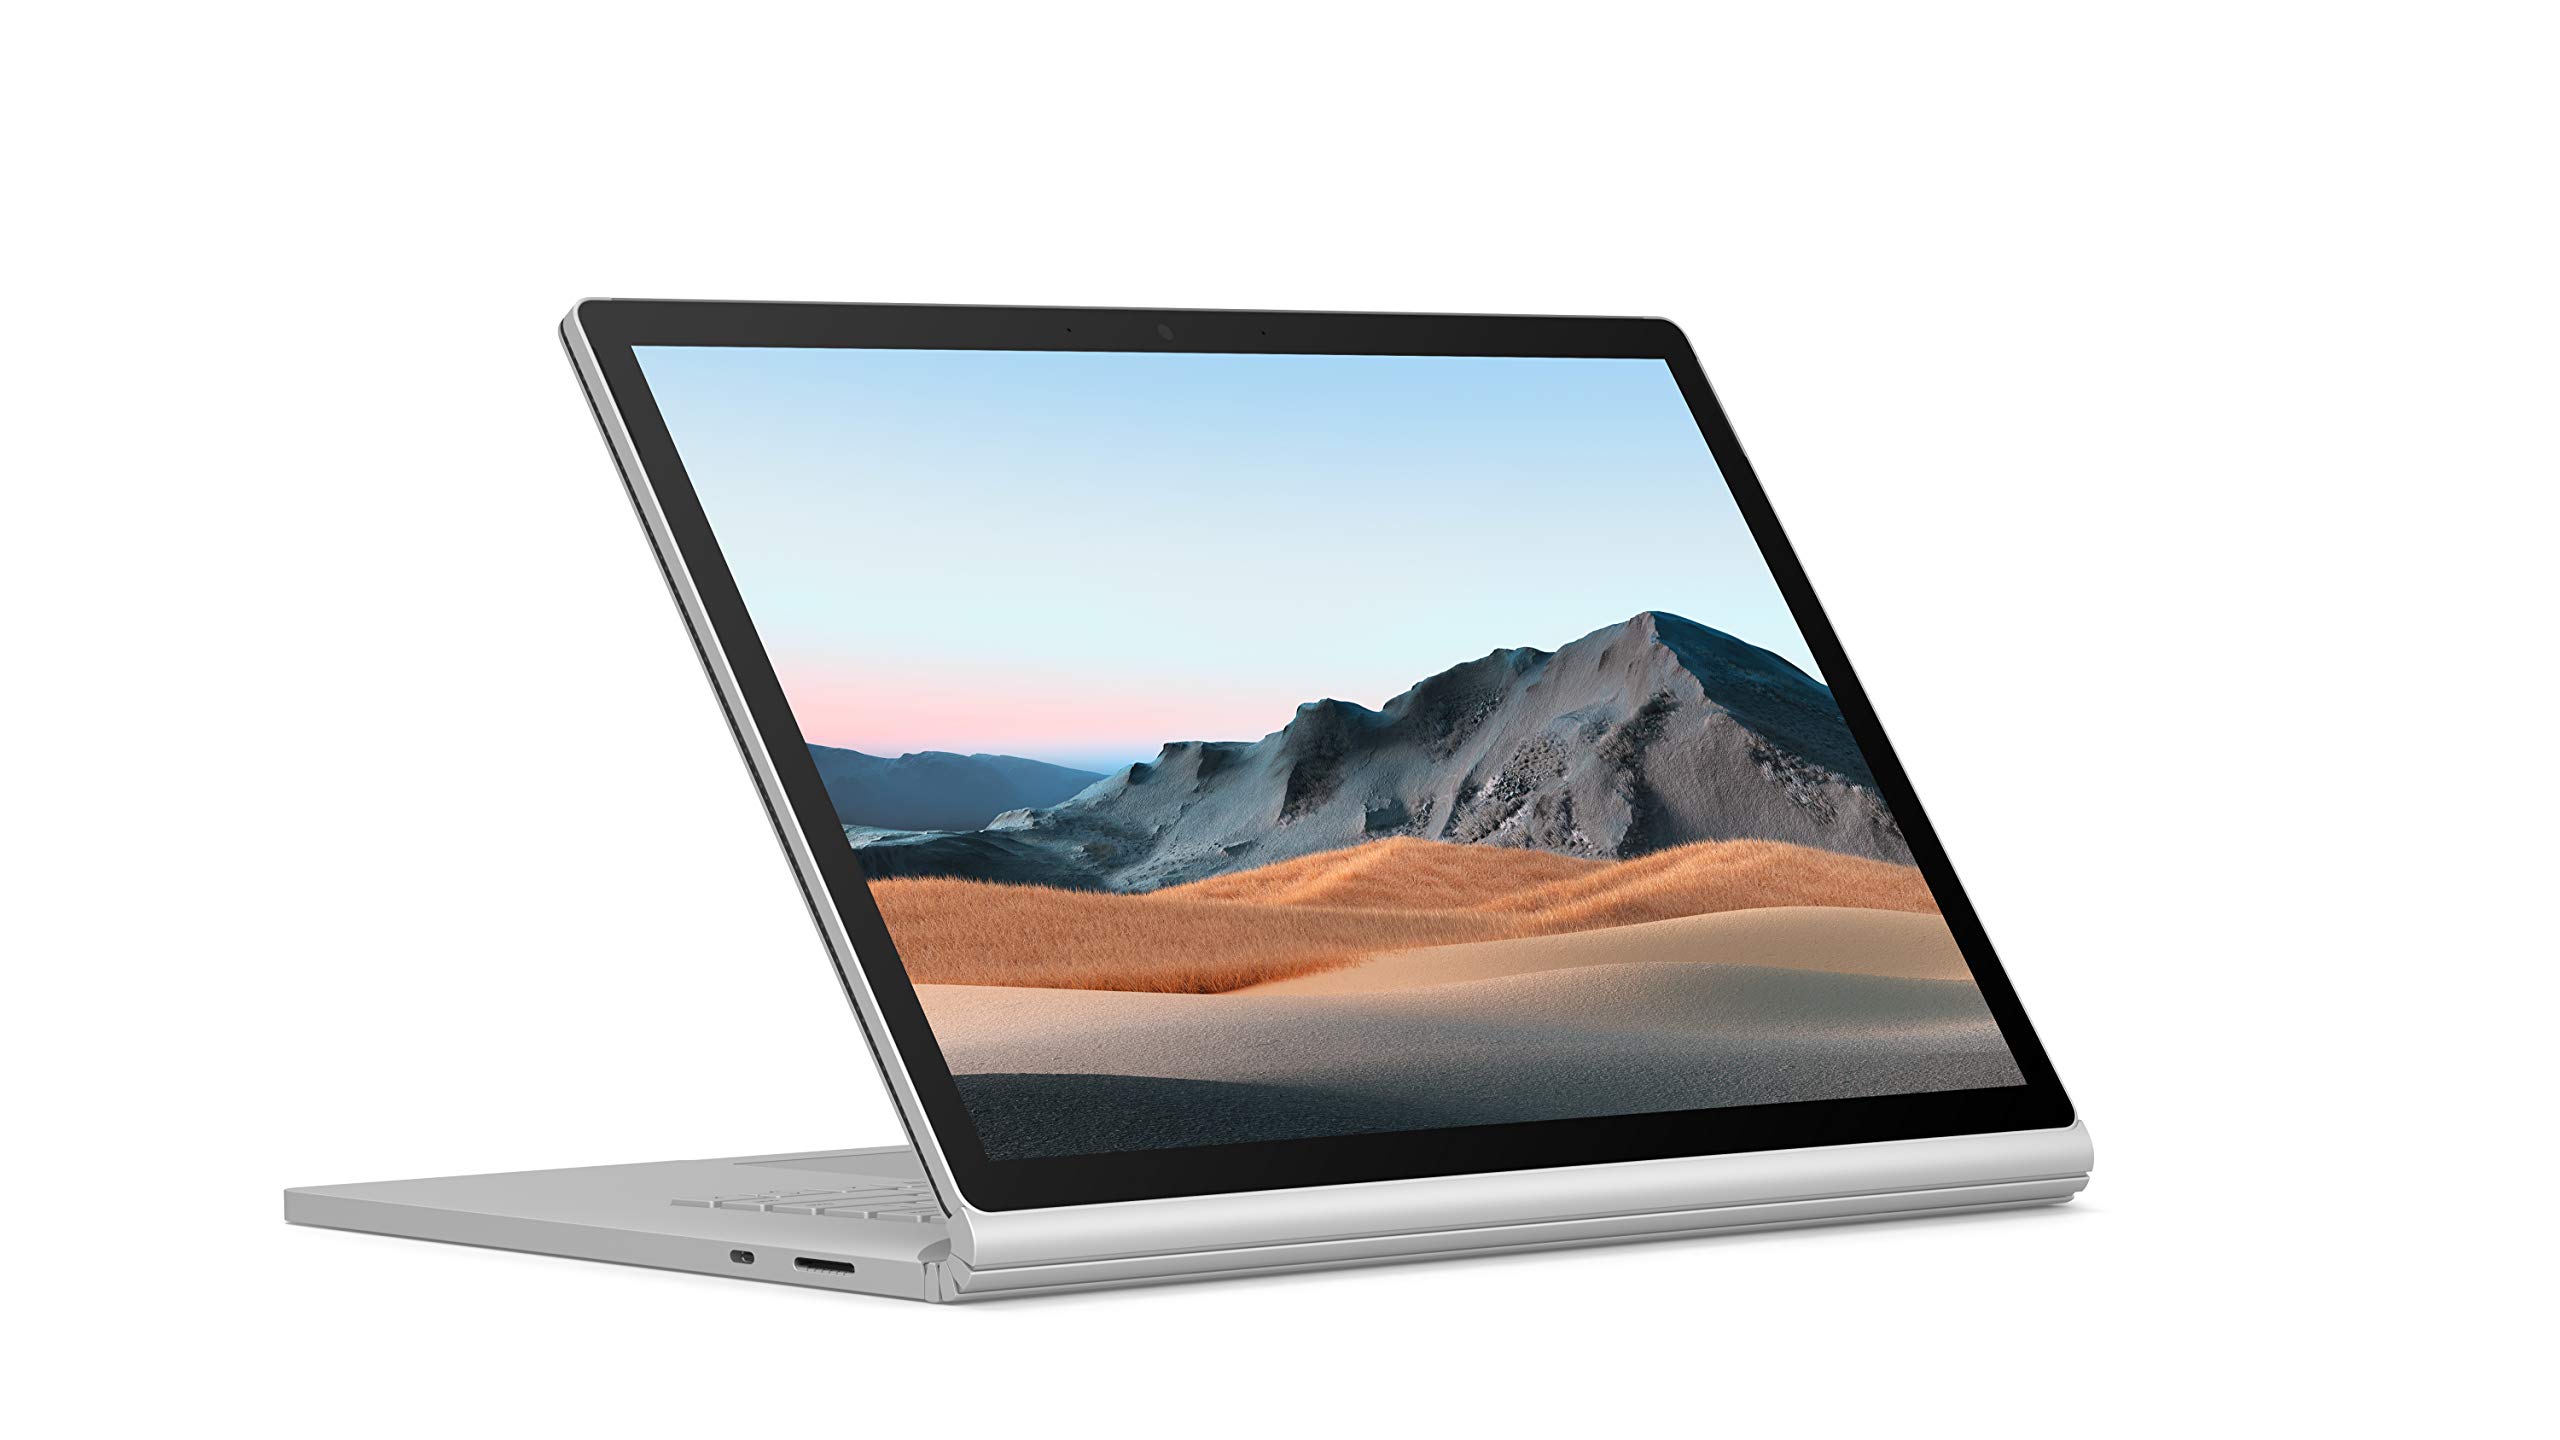 NEW Microsoft Surface Book 3 - 15